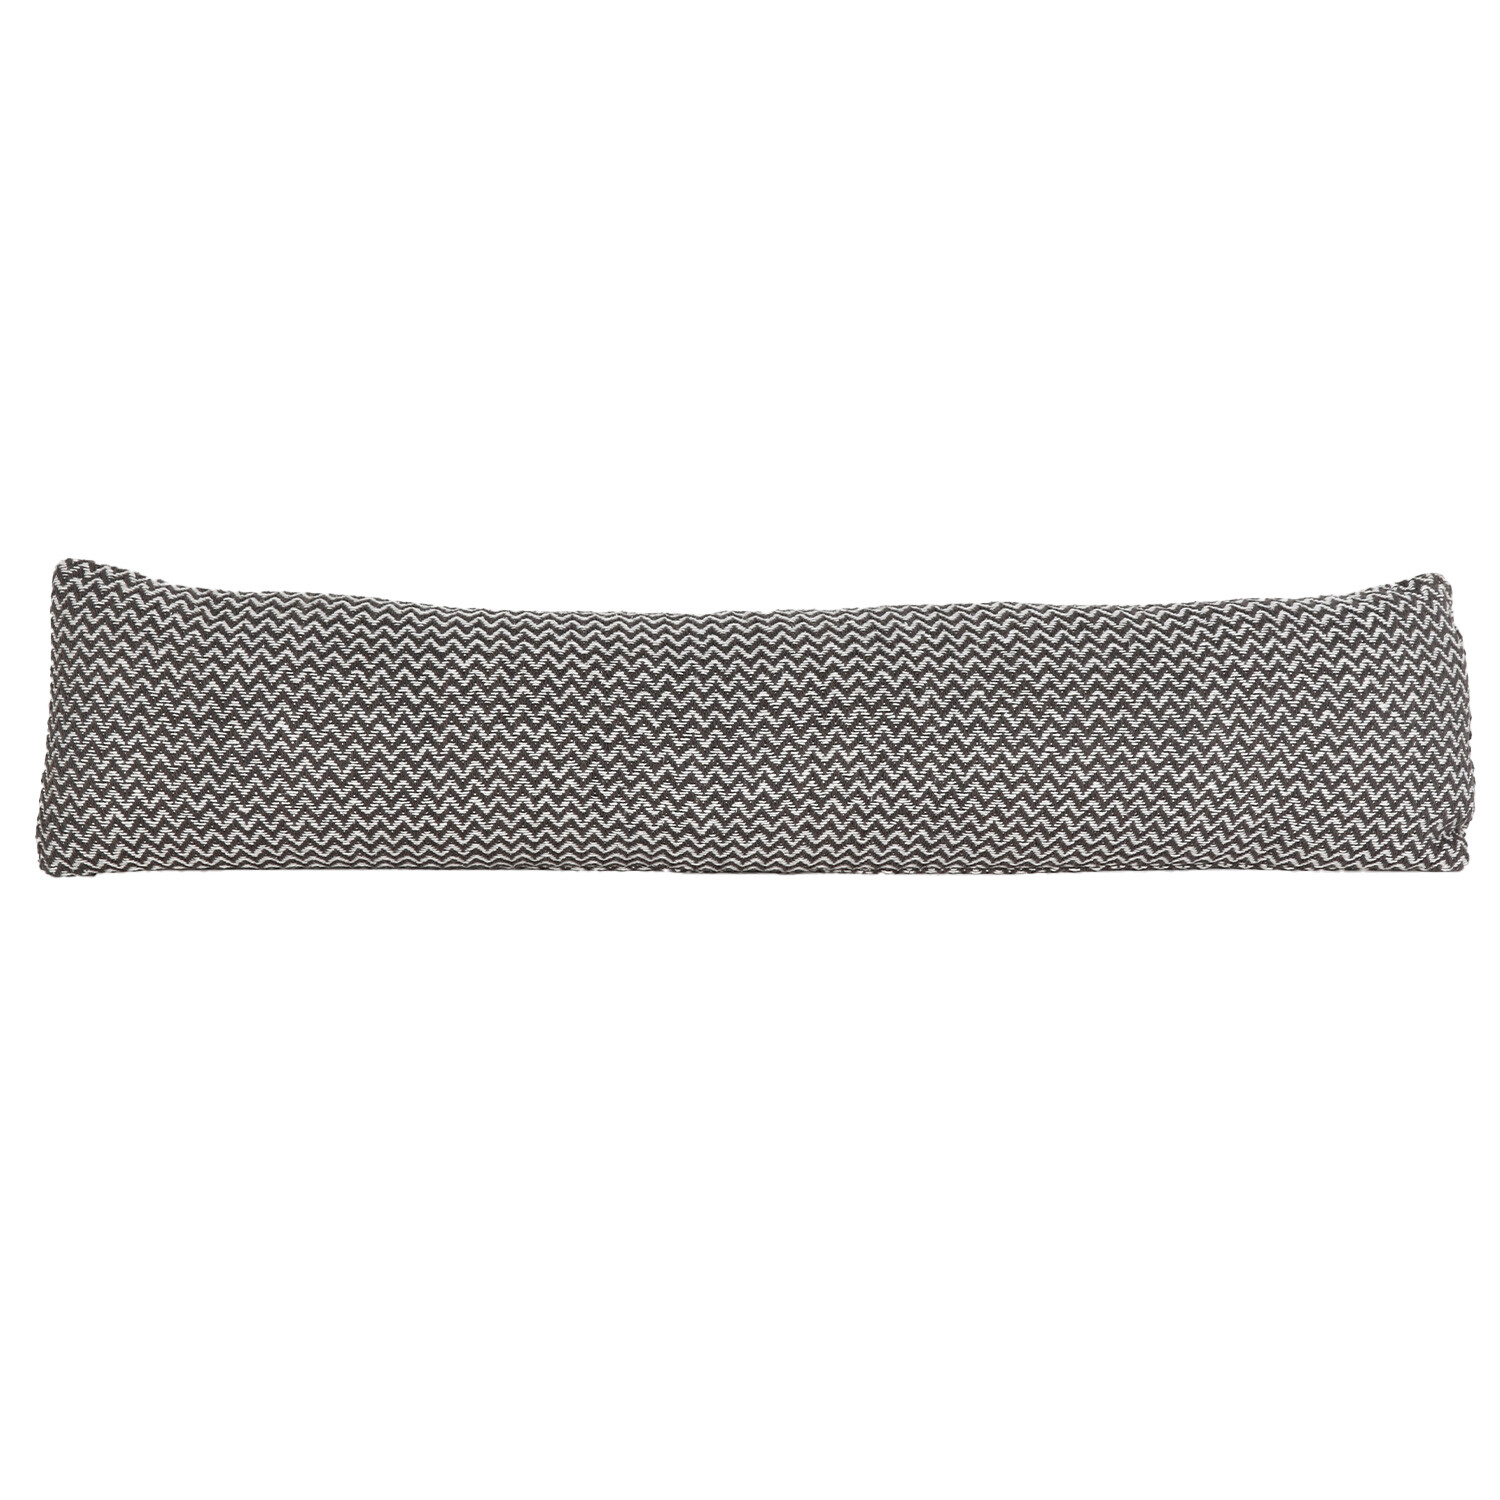 Grey Chevron Draught Excluder Image 1